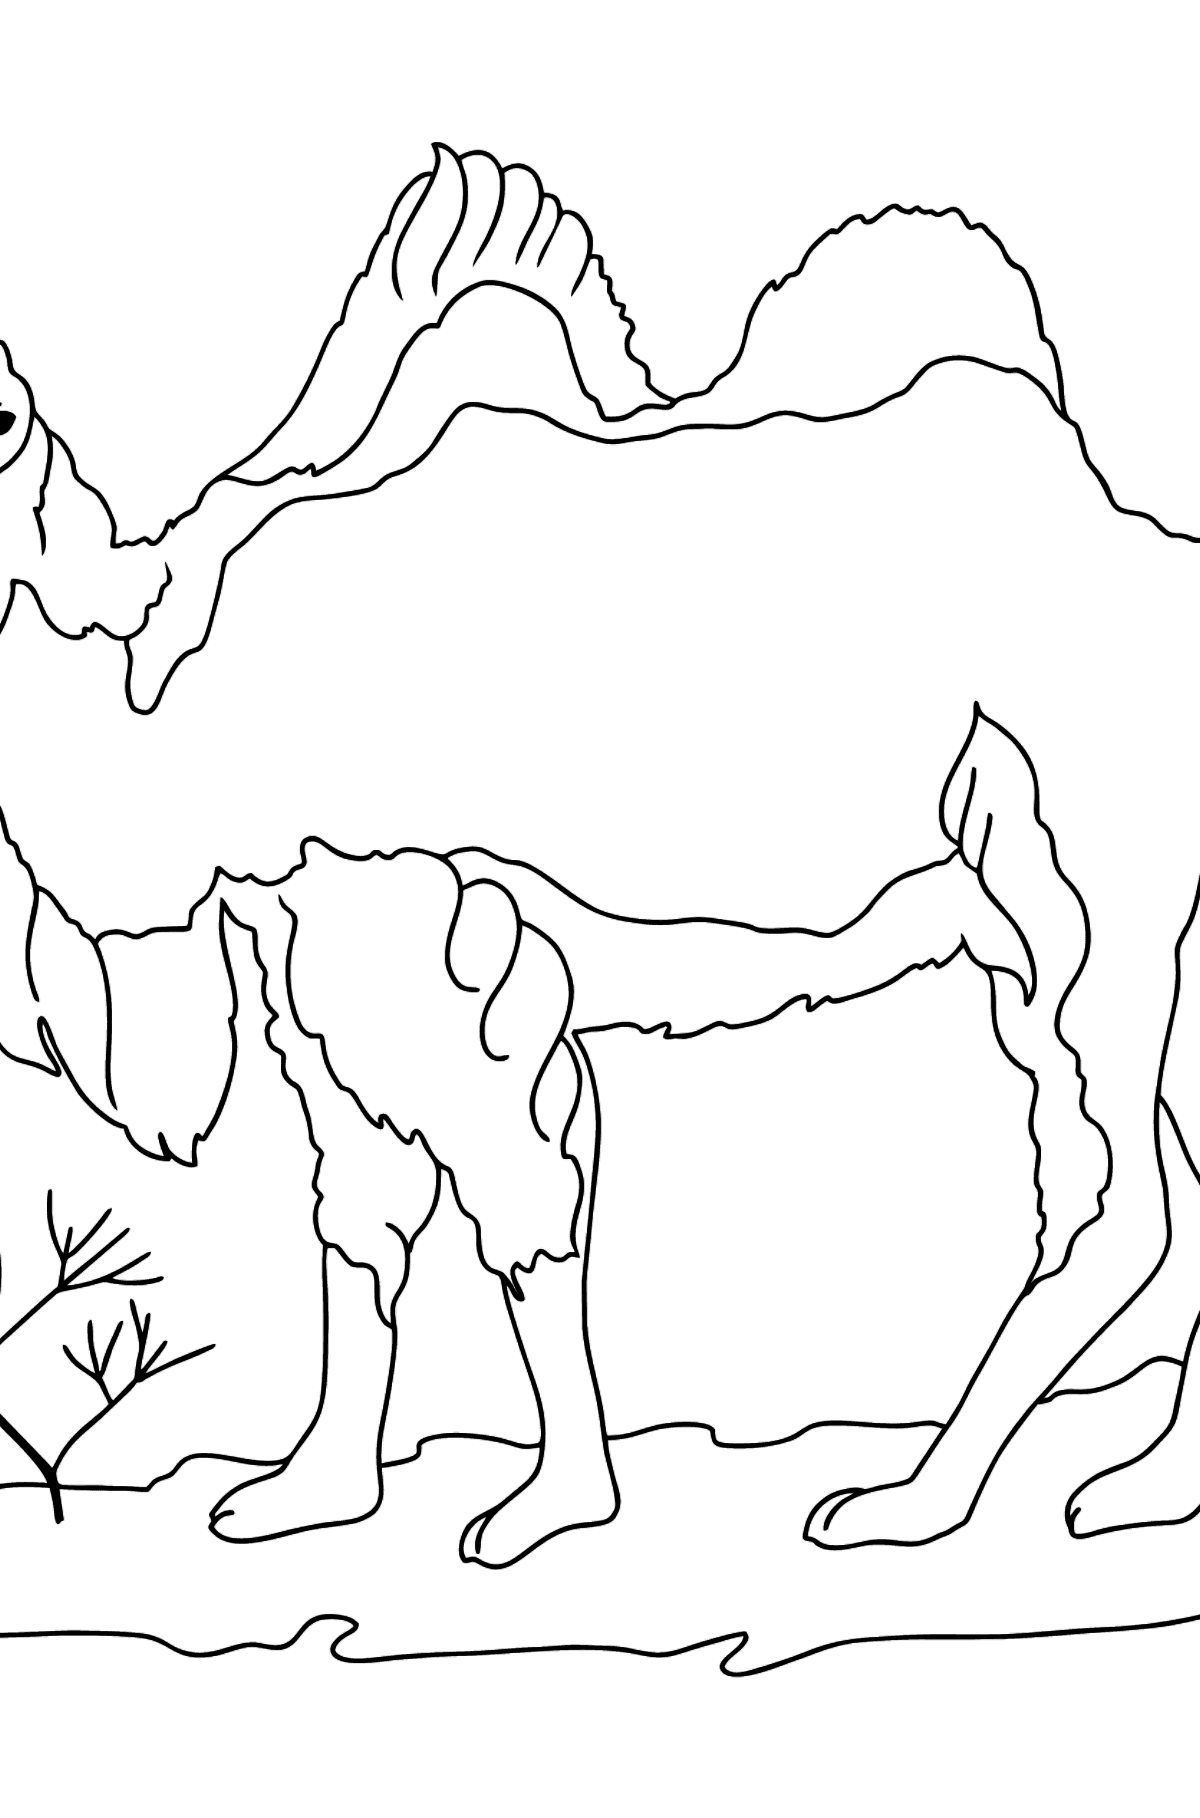 Coloring Page - A Camel in the Desert - Coloring Pages for Kids